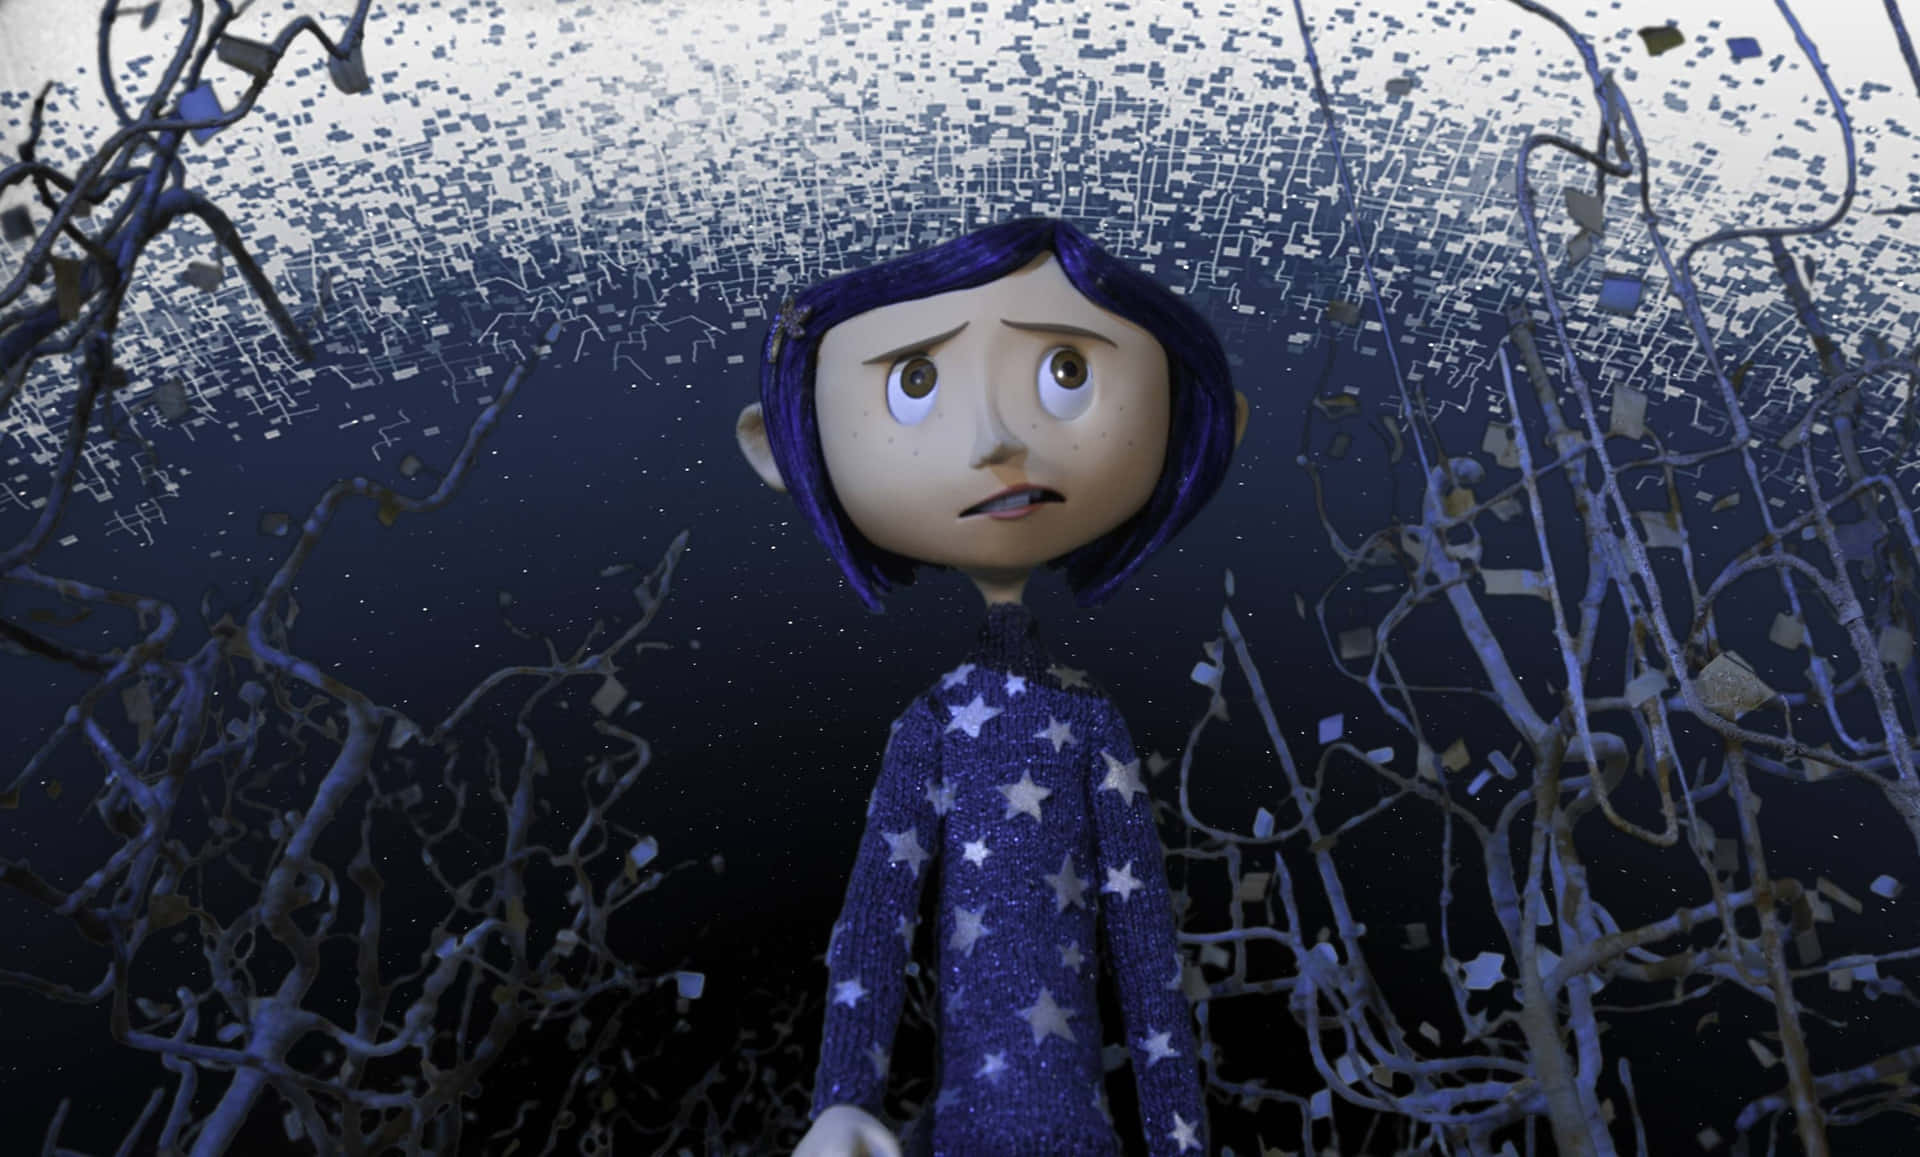 A close-up of Coraline